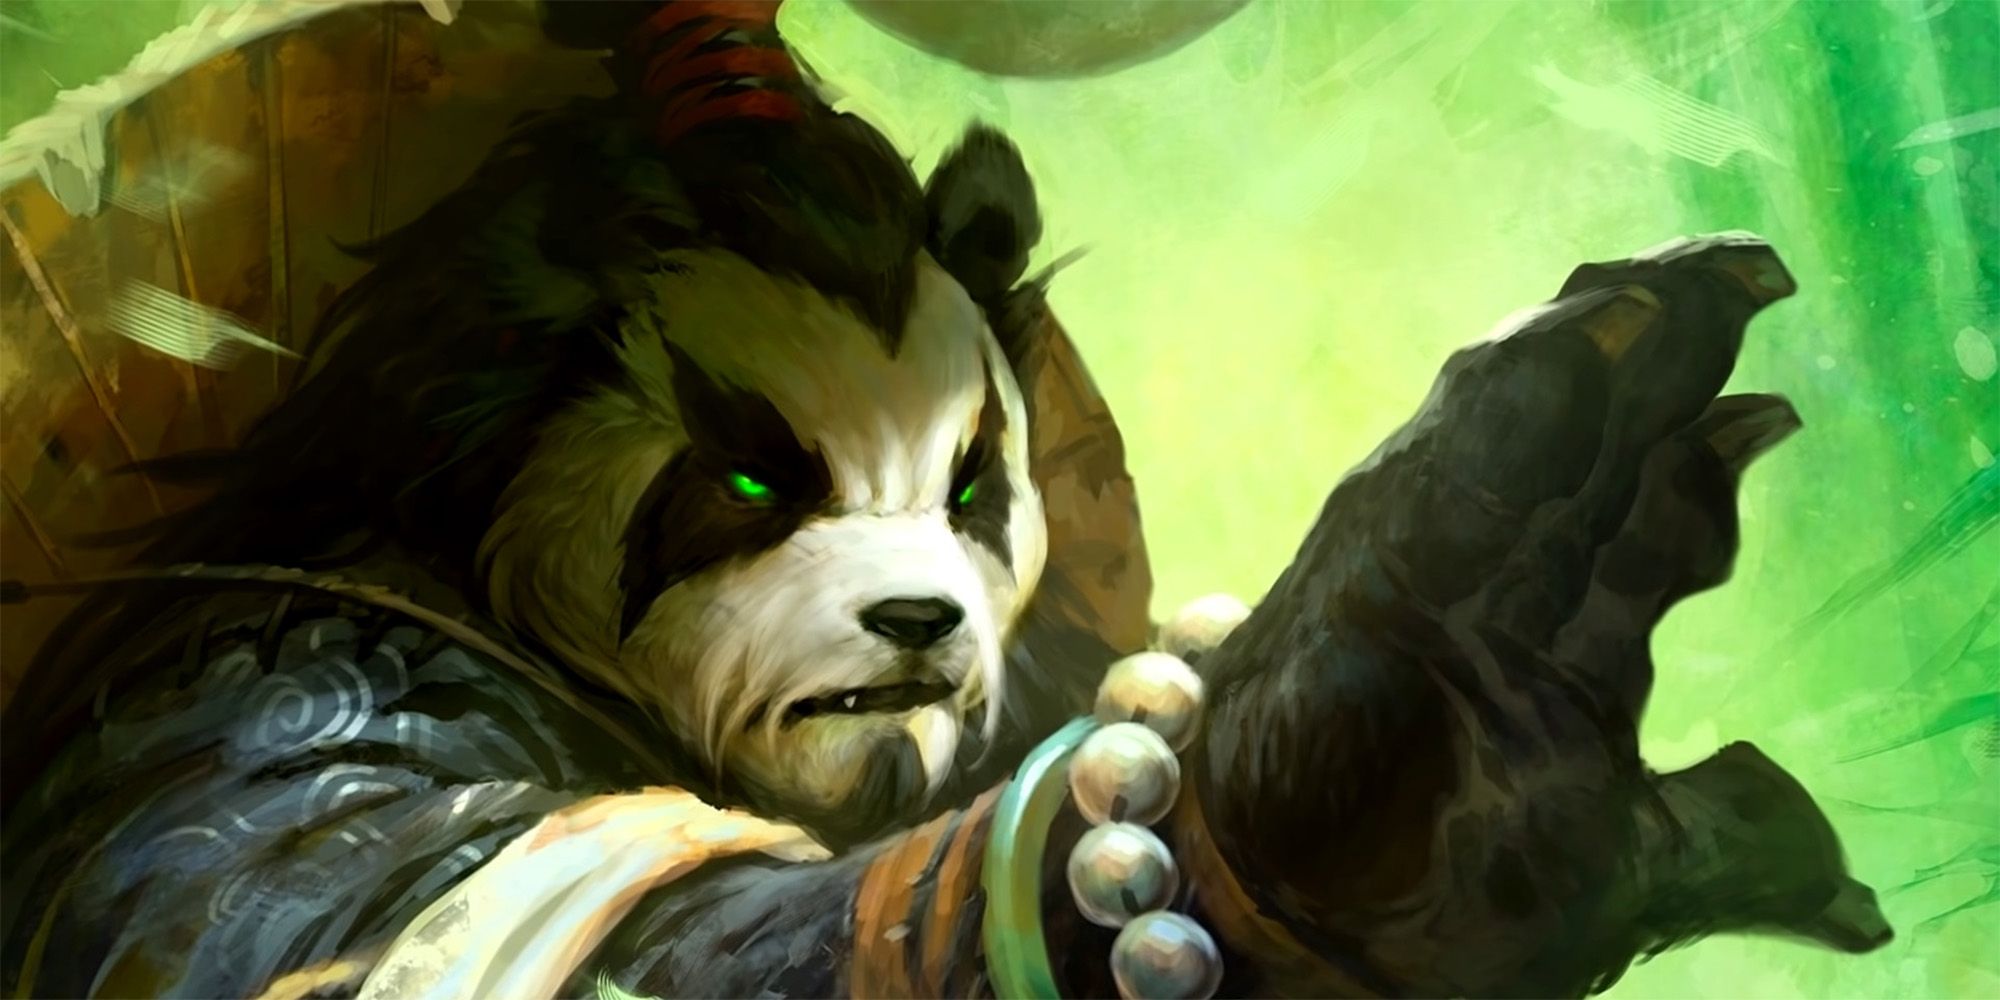 Panda monk holding his hand forward in a battle stance